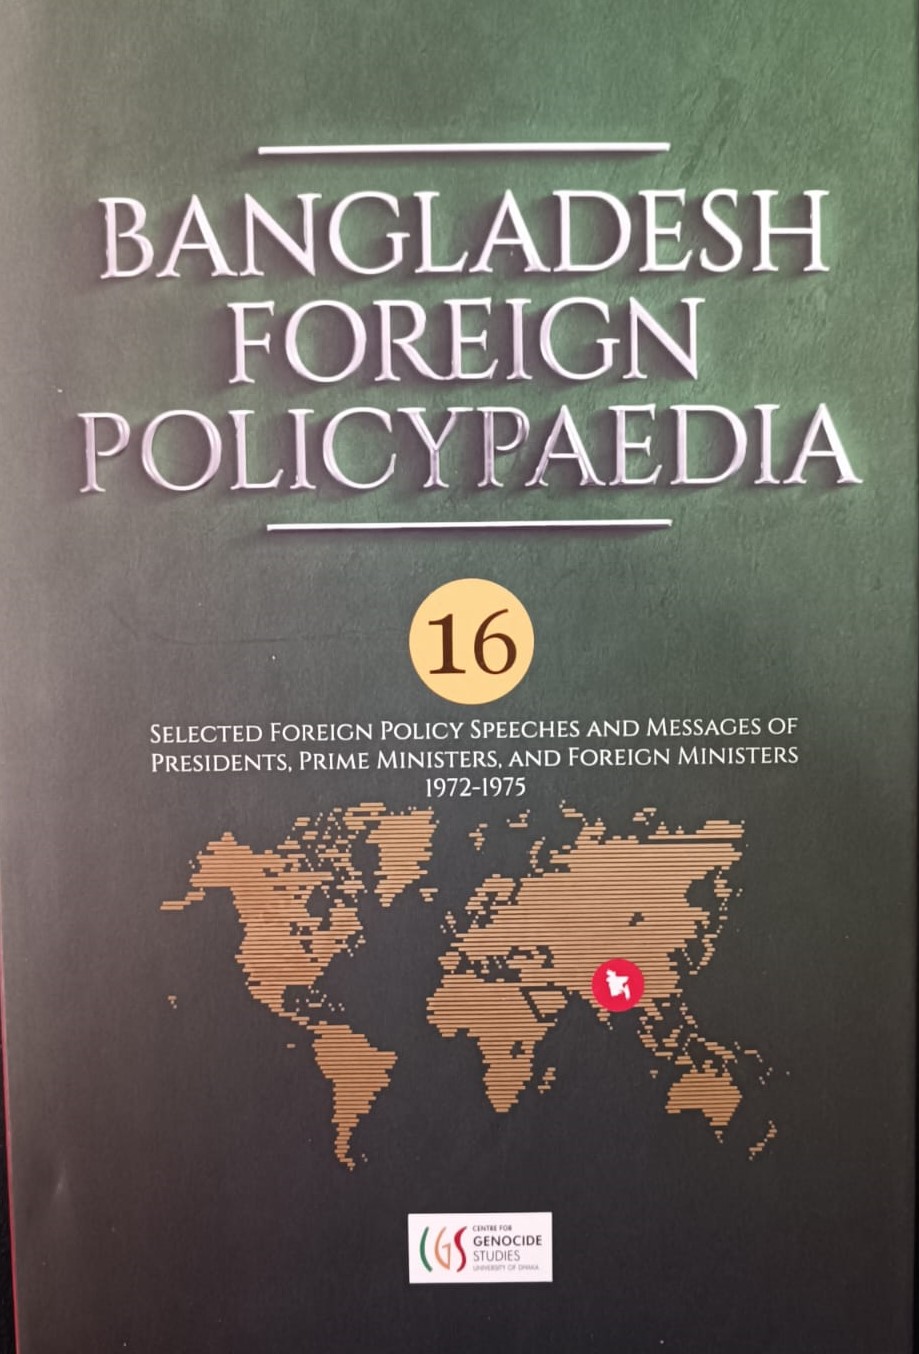 Bangladesh Foreign Policy Paedia: Selected Foreign Policy Speeches and Messages of Presidents, Prime Ministers and Foreign Ministers from 1972-1975